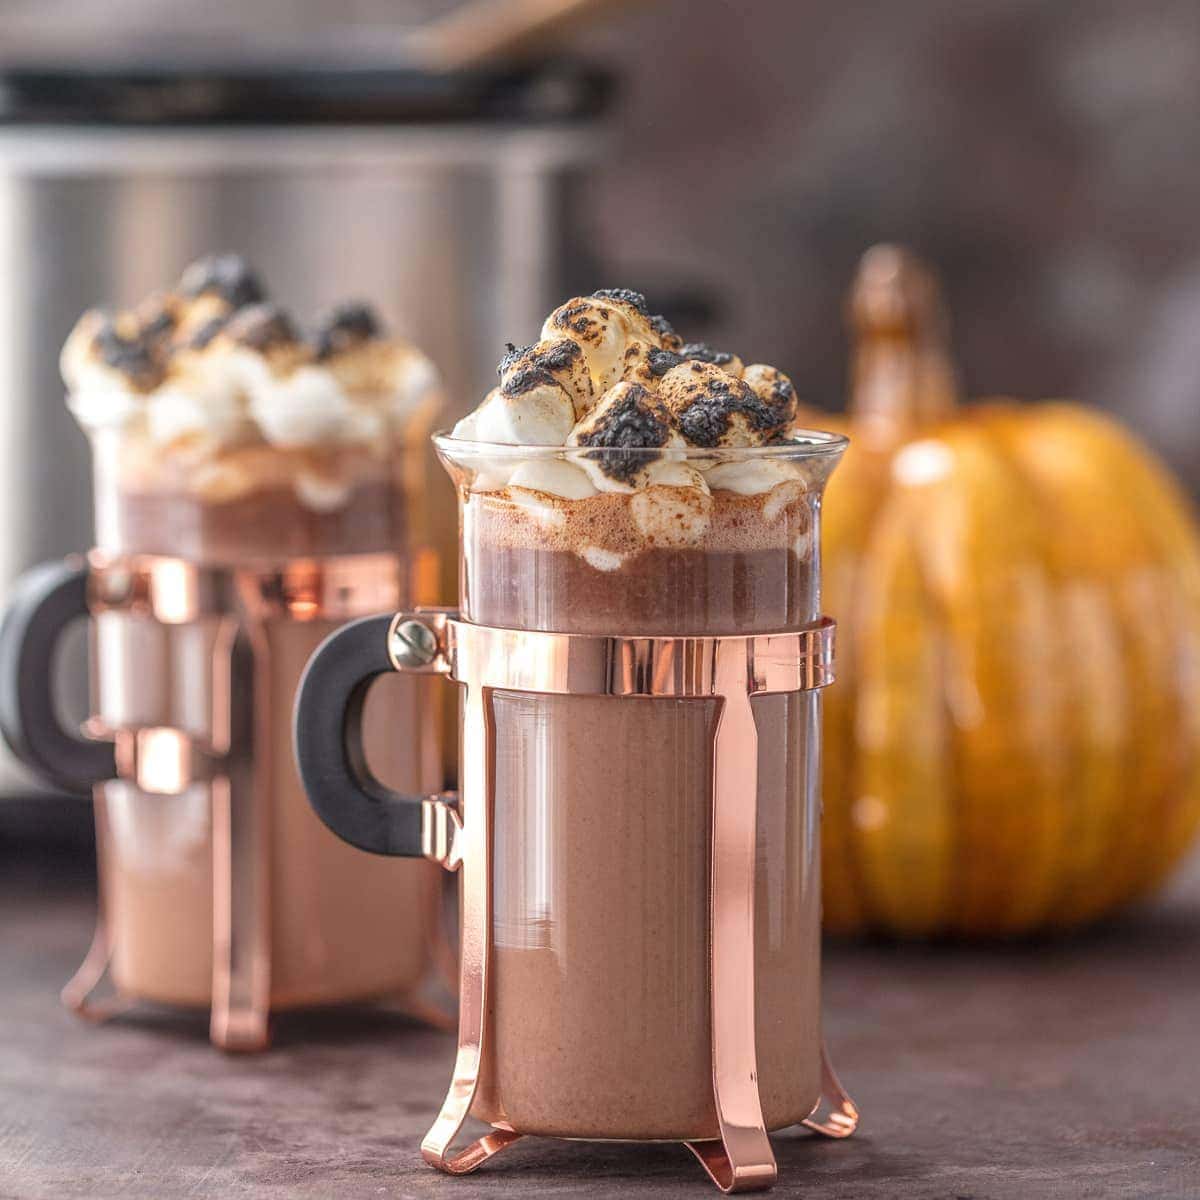 Pumpkin Spice Hot Chocolate - Slow Cooker Spiked Hot Chocolate